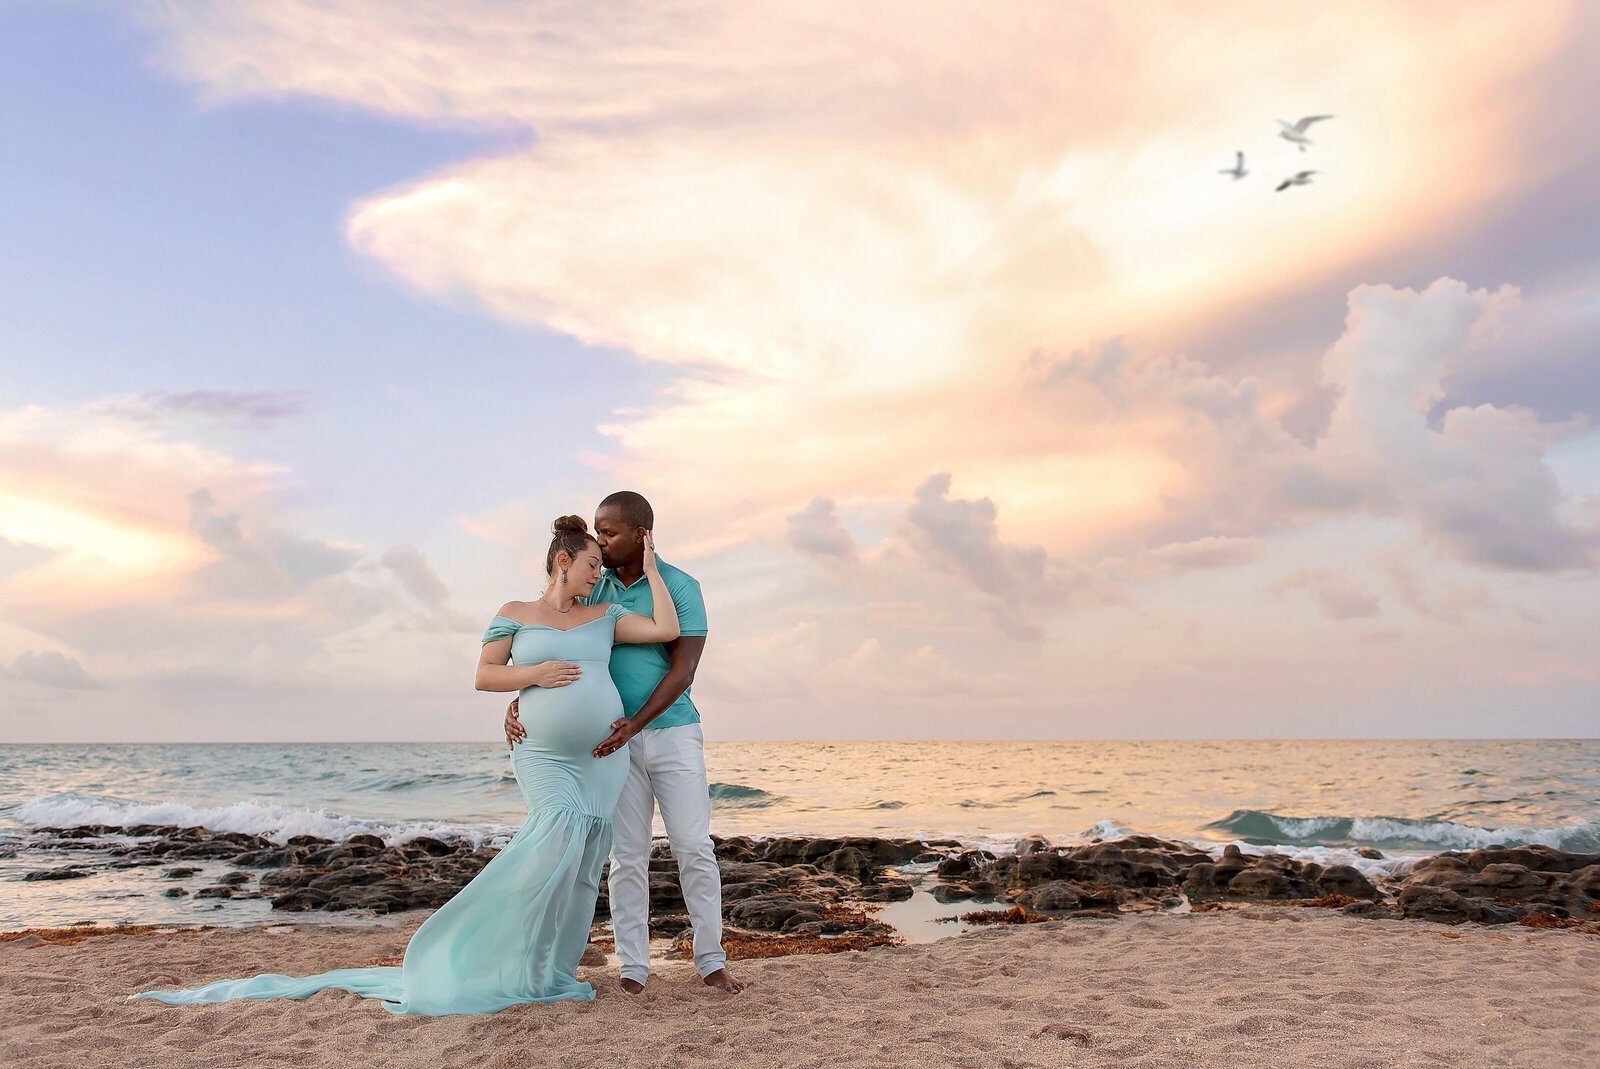 Husband and wife maternity pictures on the beach with rocks in Jupiter, FL.